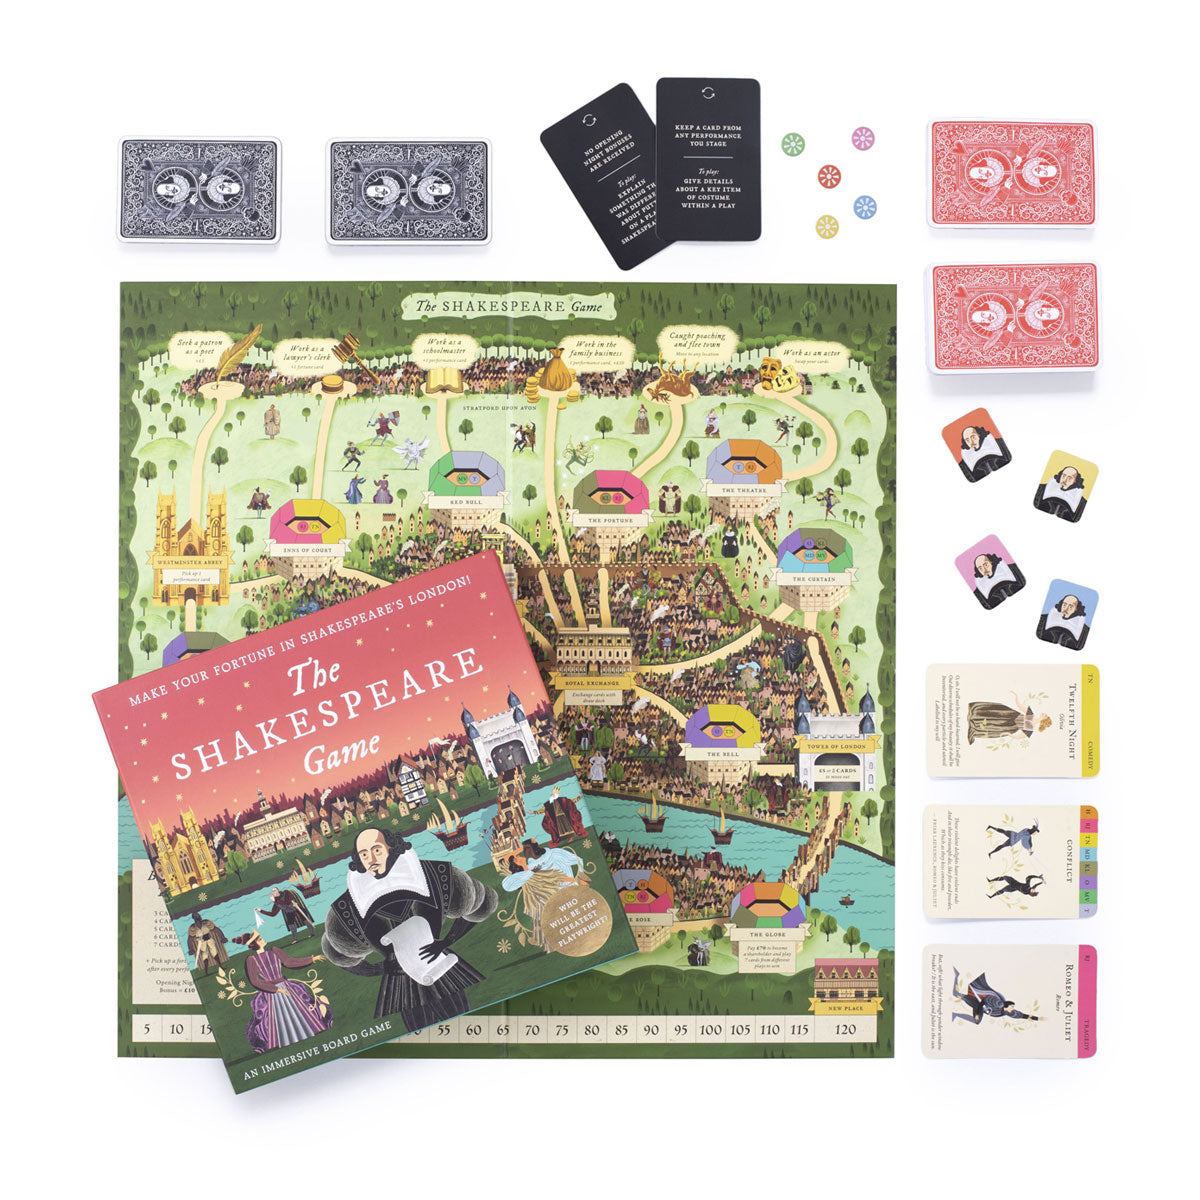 The Shakespeare Game: An Immersive Board Game